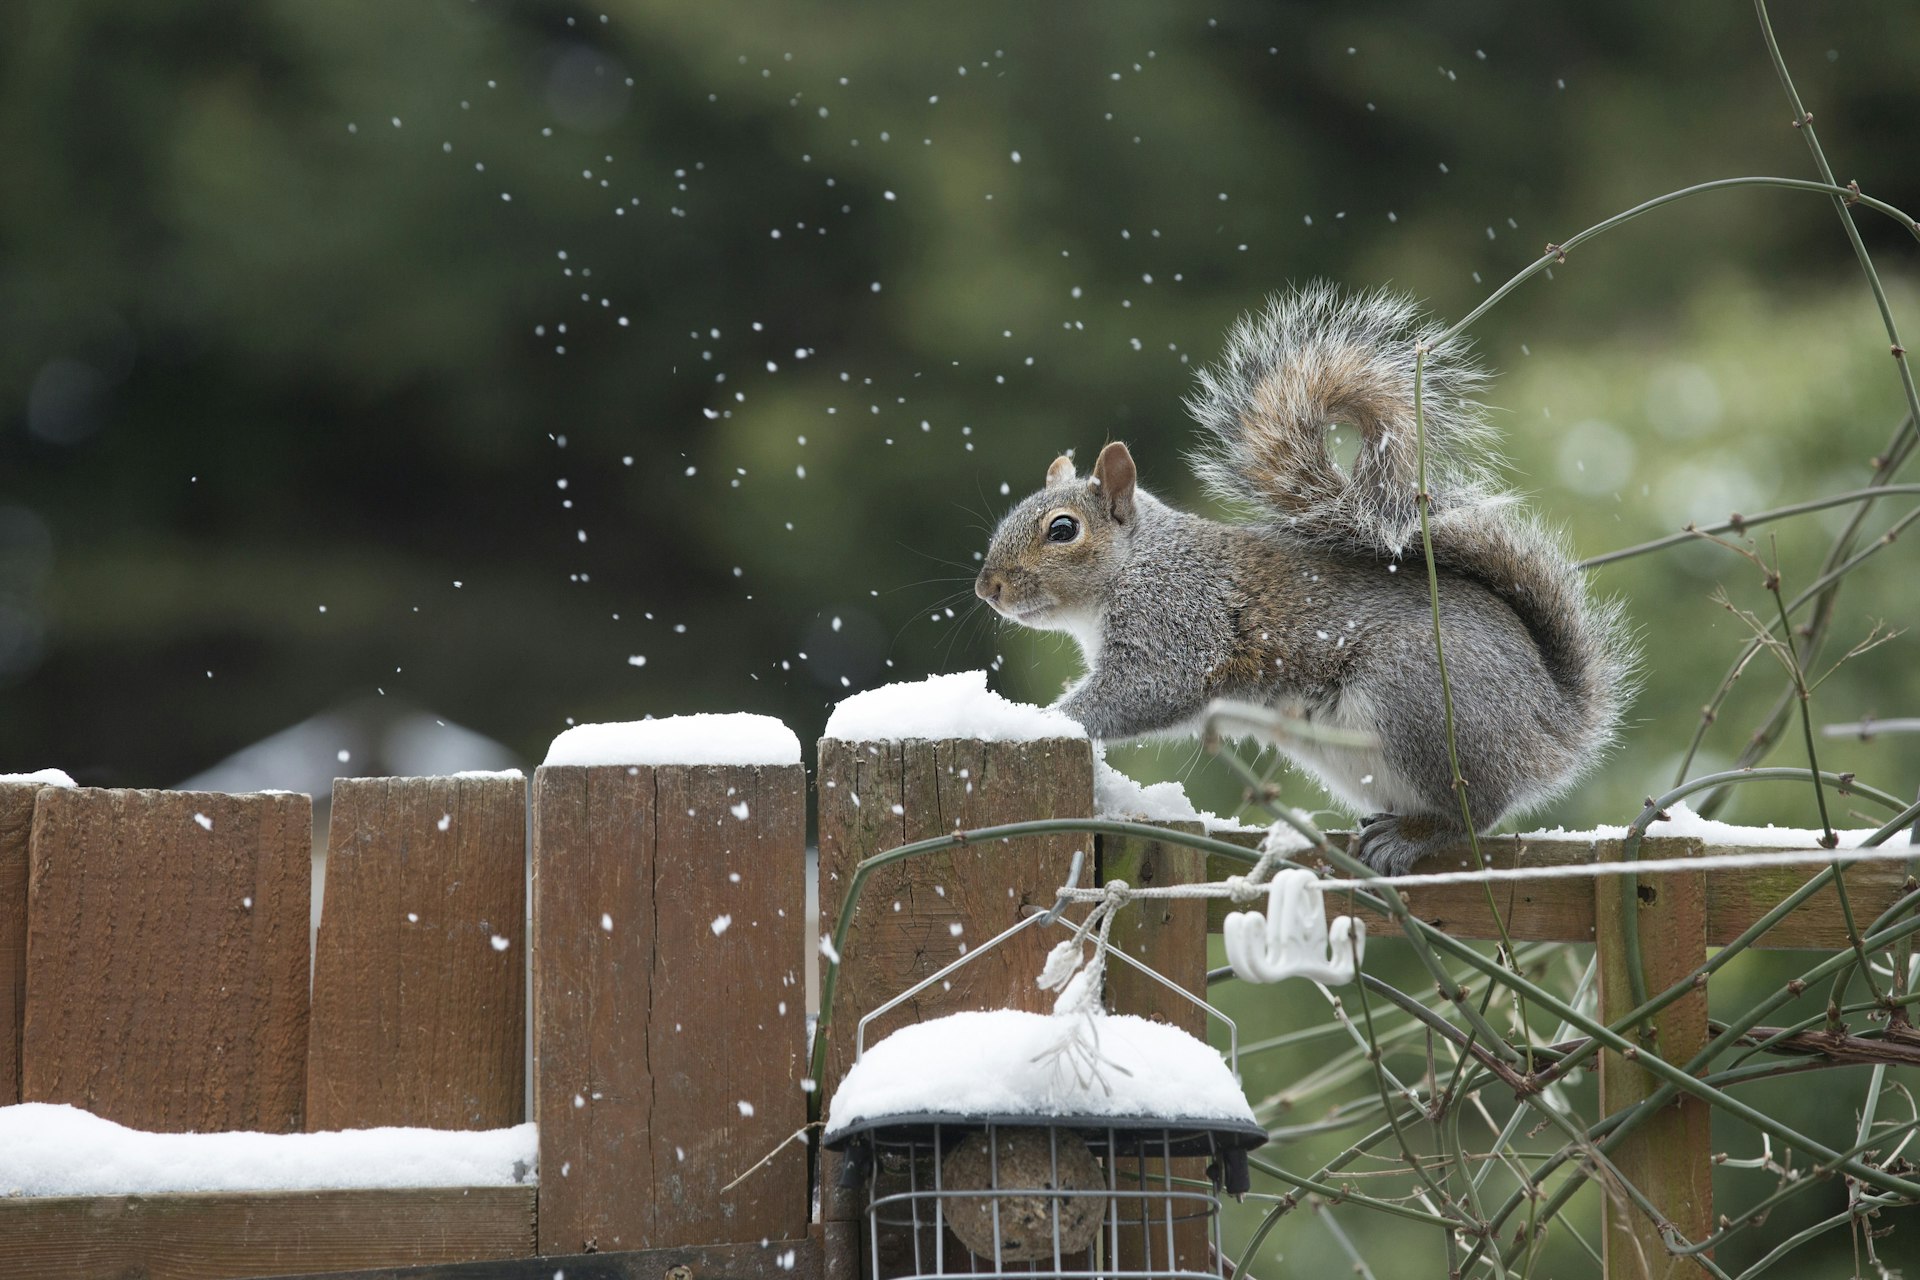 A grey squirrel perches on a wooden fence post, as snow falls